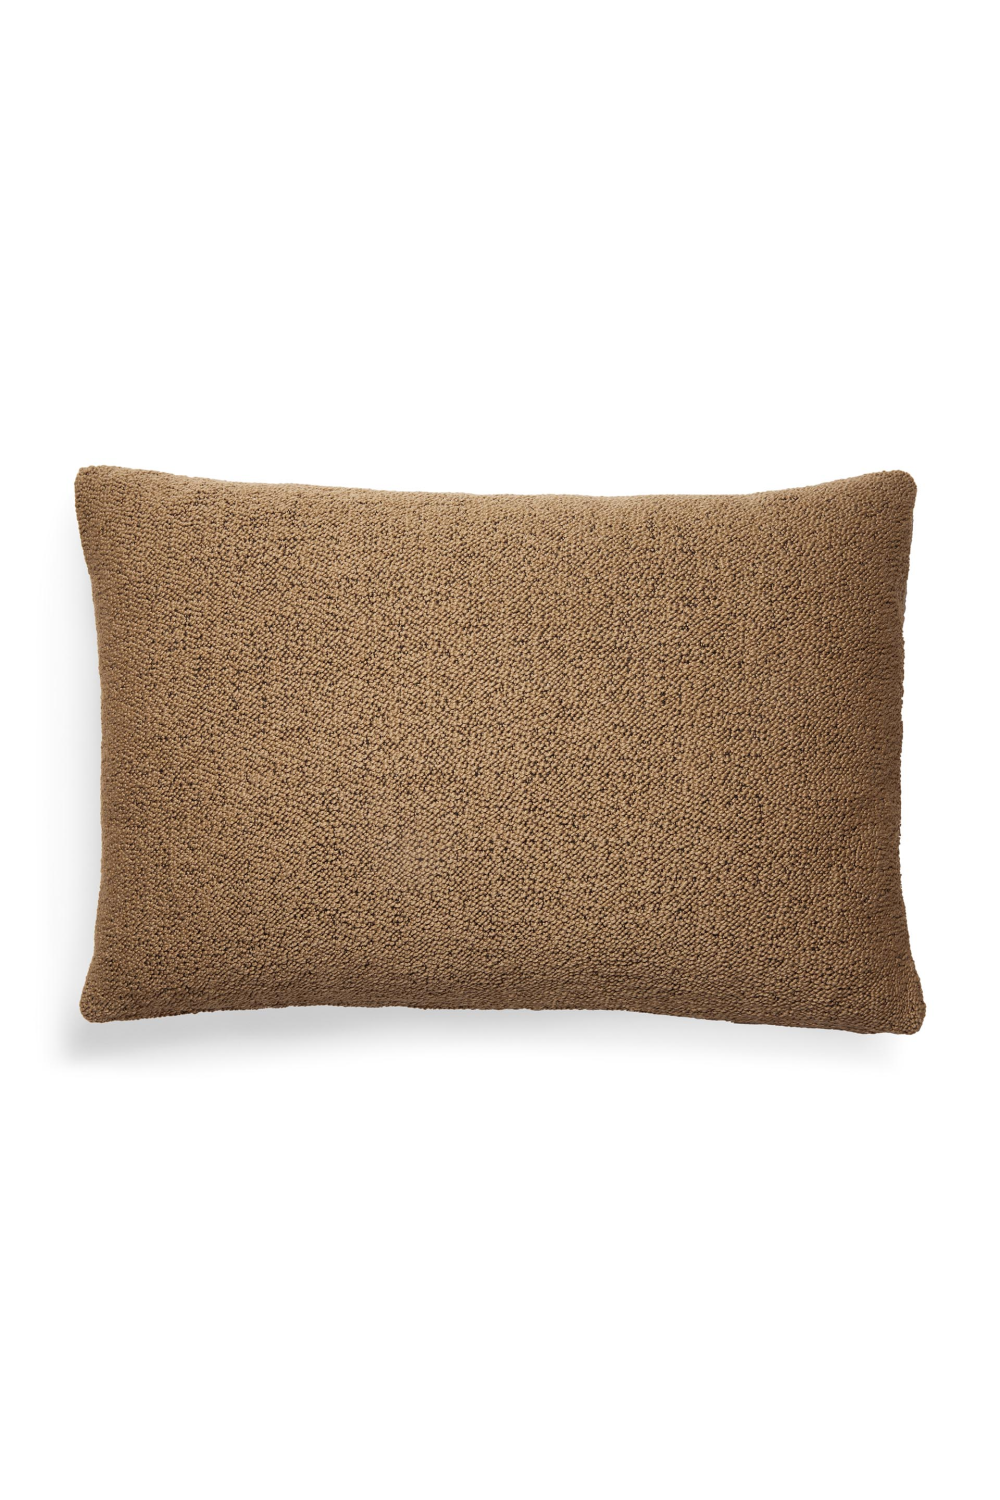 Cumin Brown Outdoor Cushion | Ethnicraft Nomad | Woodfurniture.com